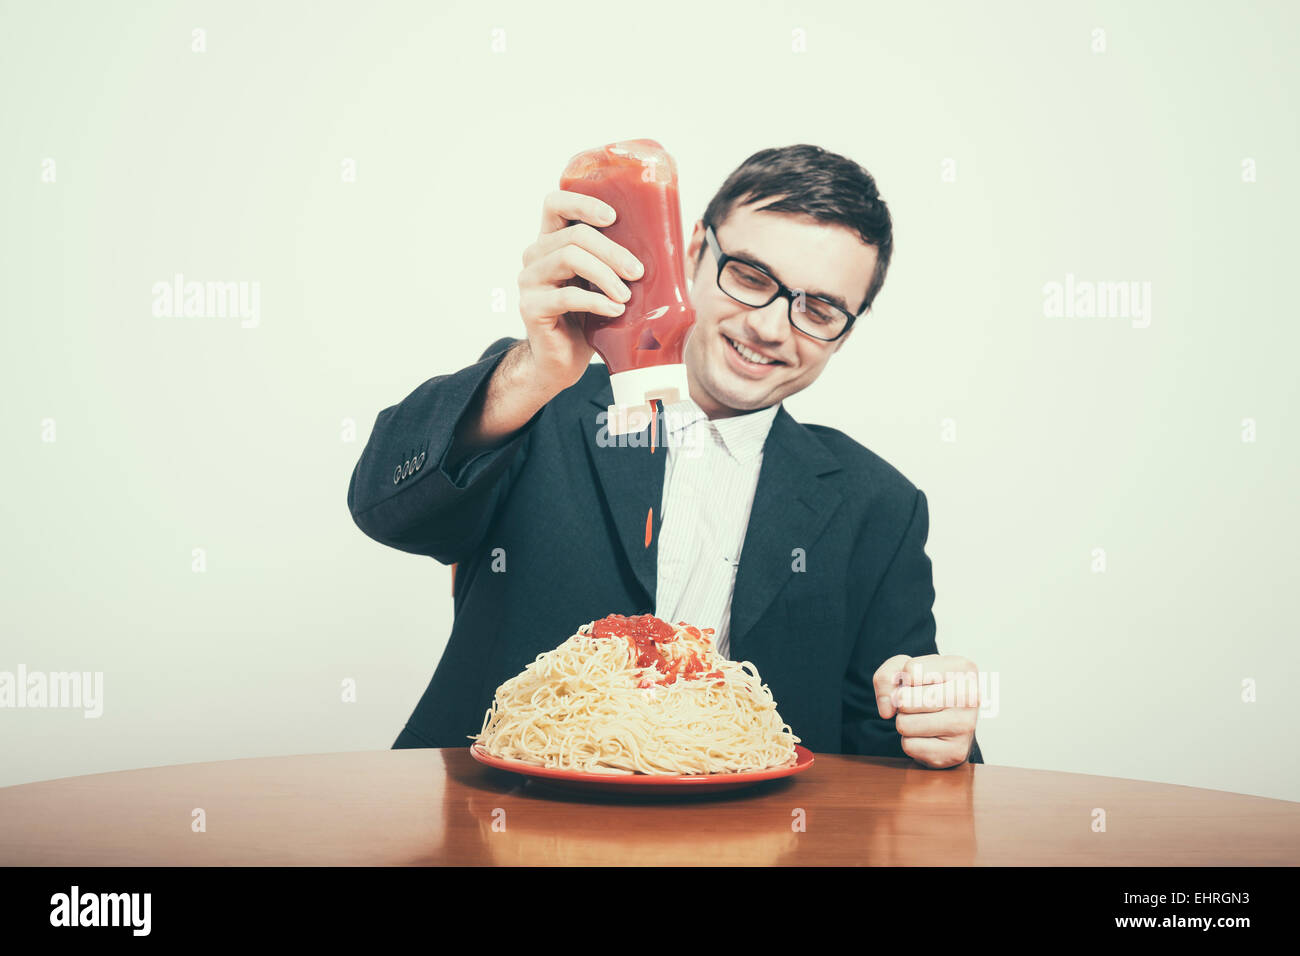 Happy consumerism concept. Happy businessman pouring ketchup on huge dish of pasta. Stock Photo